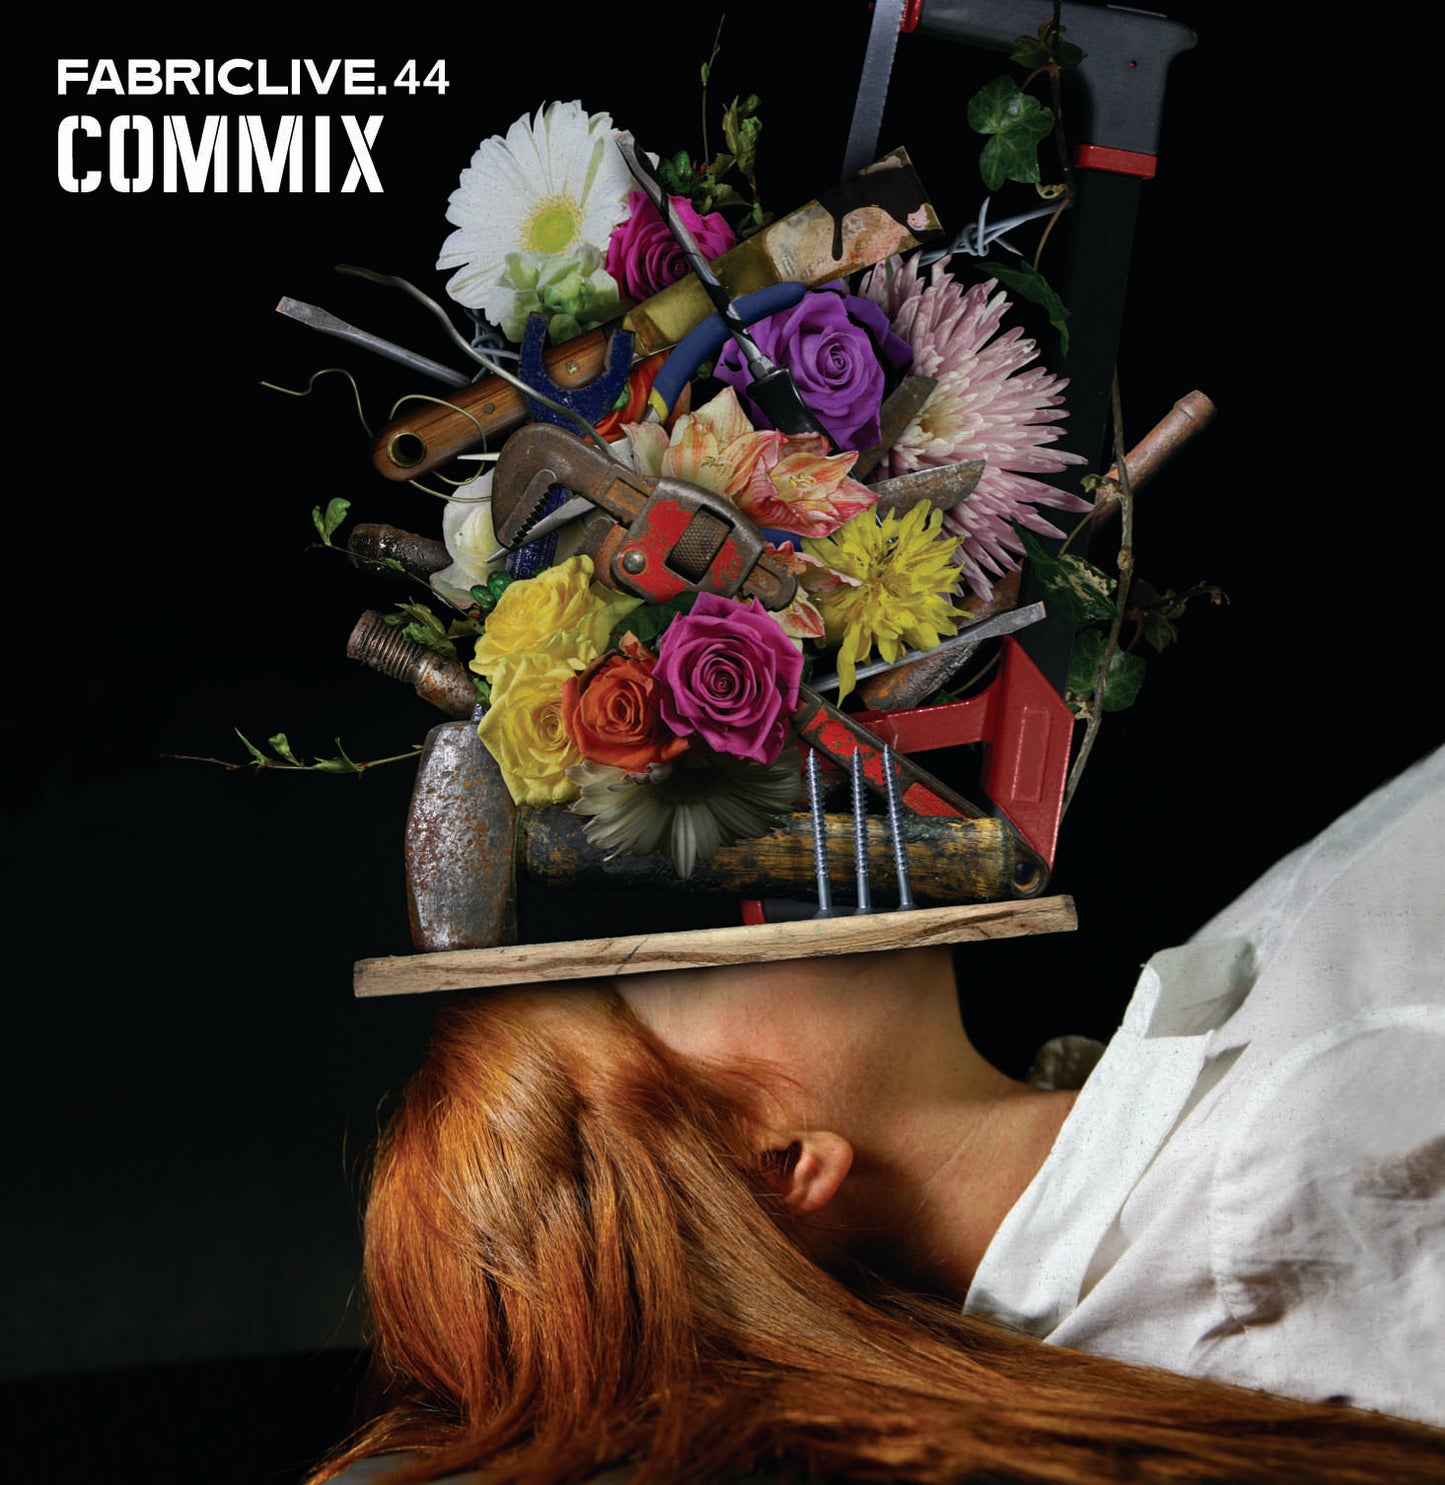 Commix - FABRICLIVE 44 CD